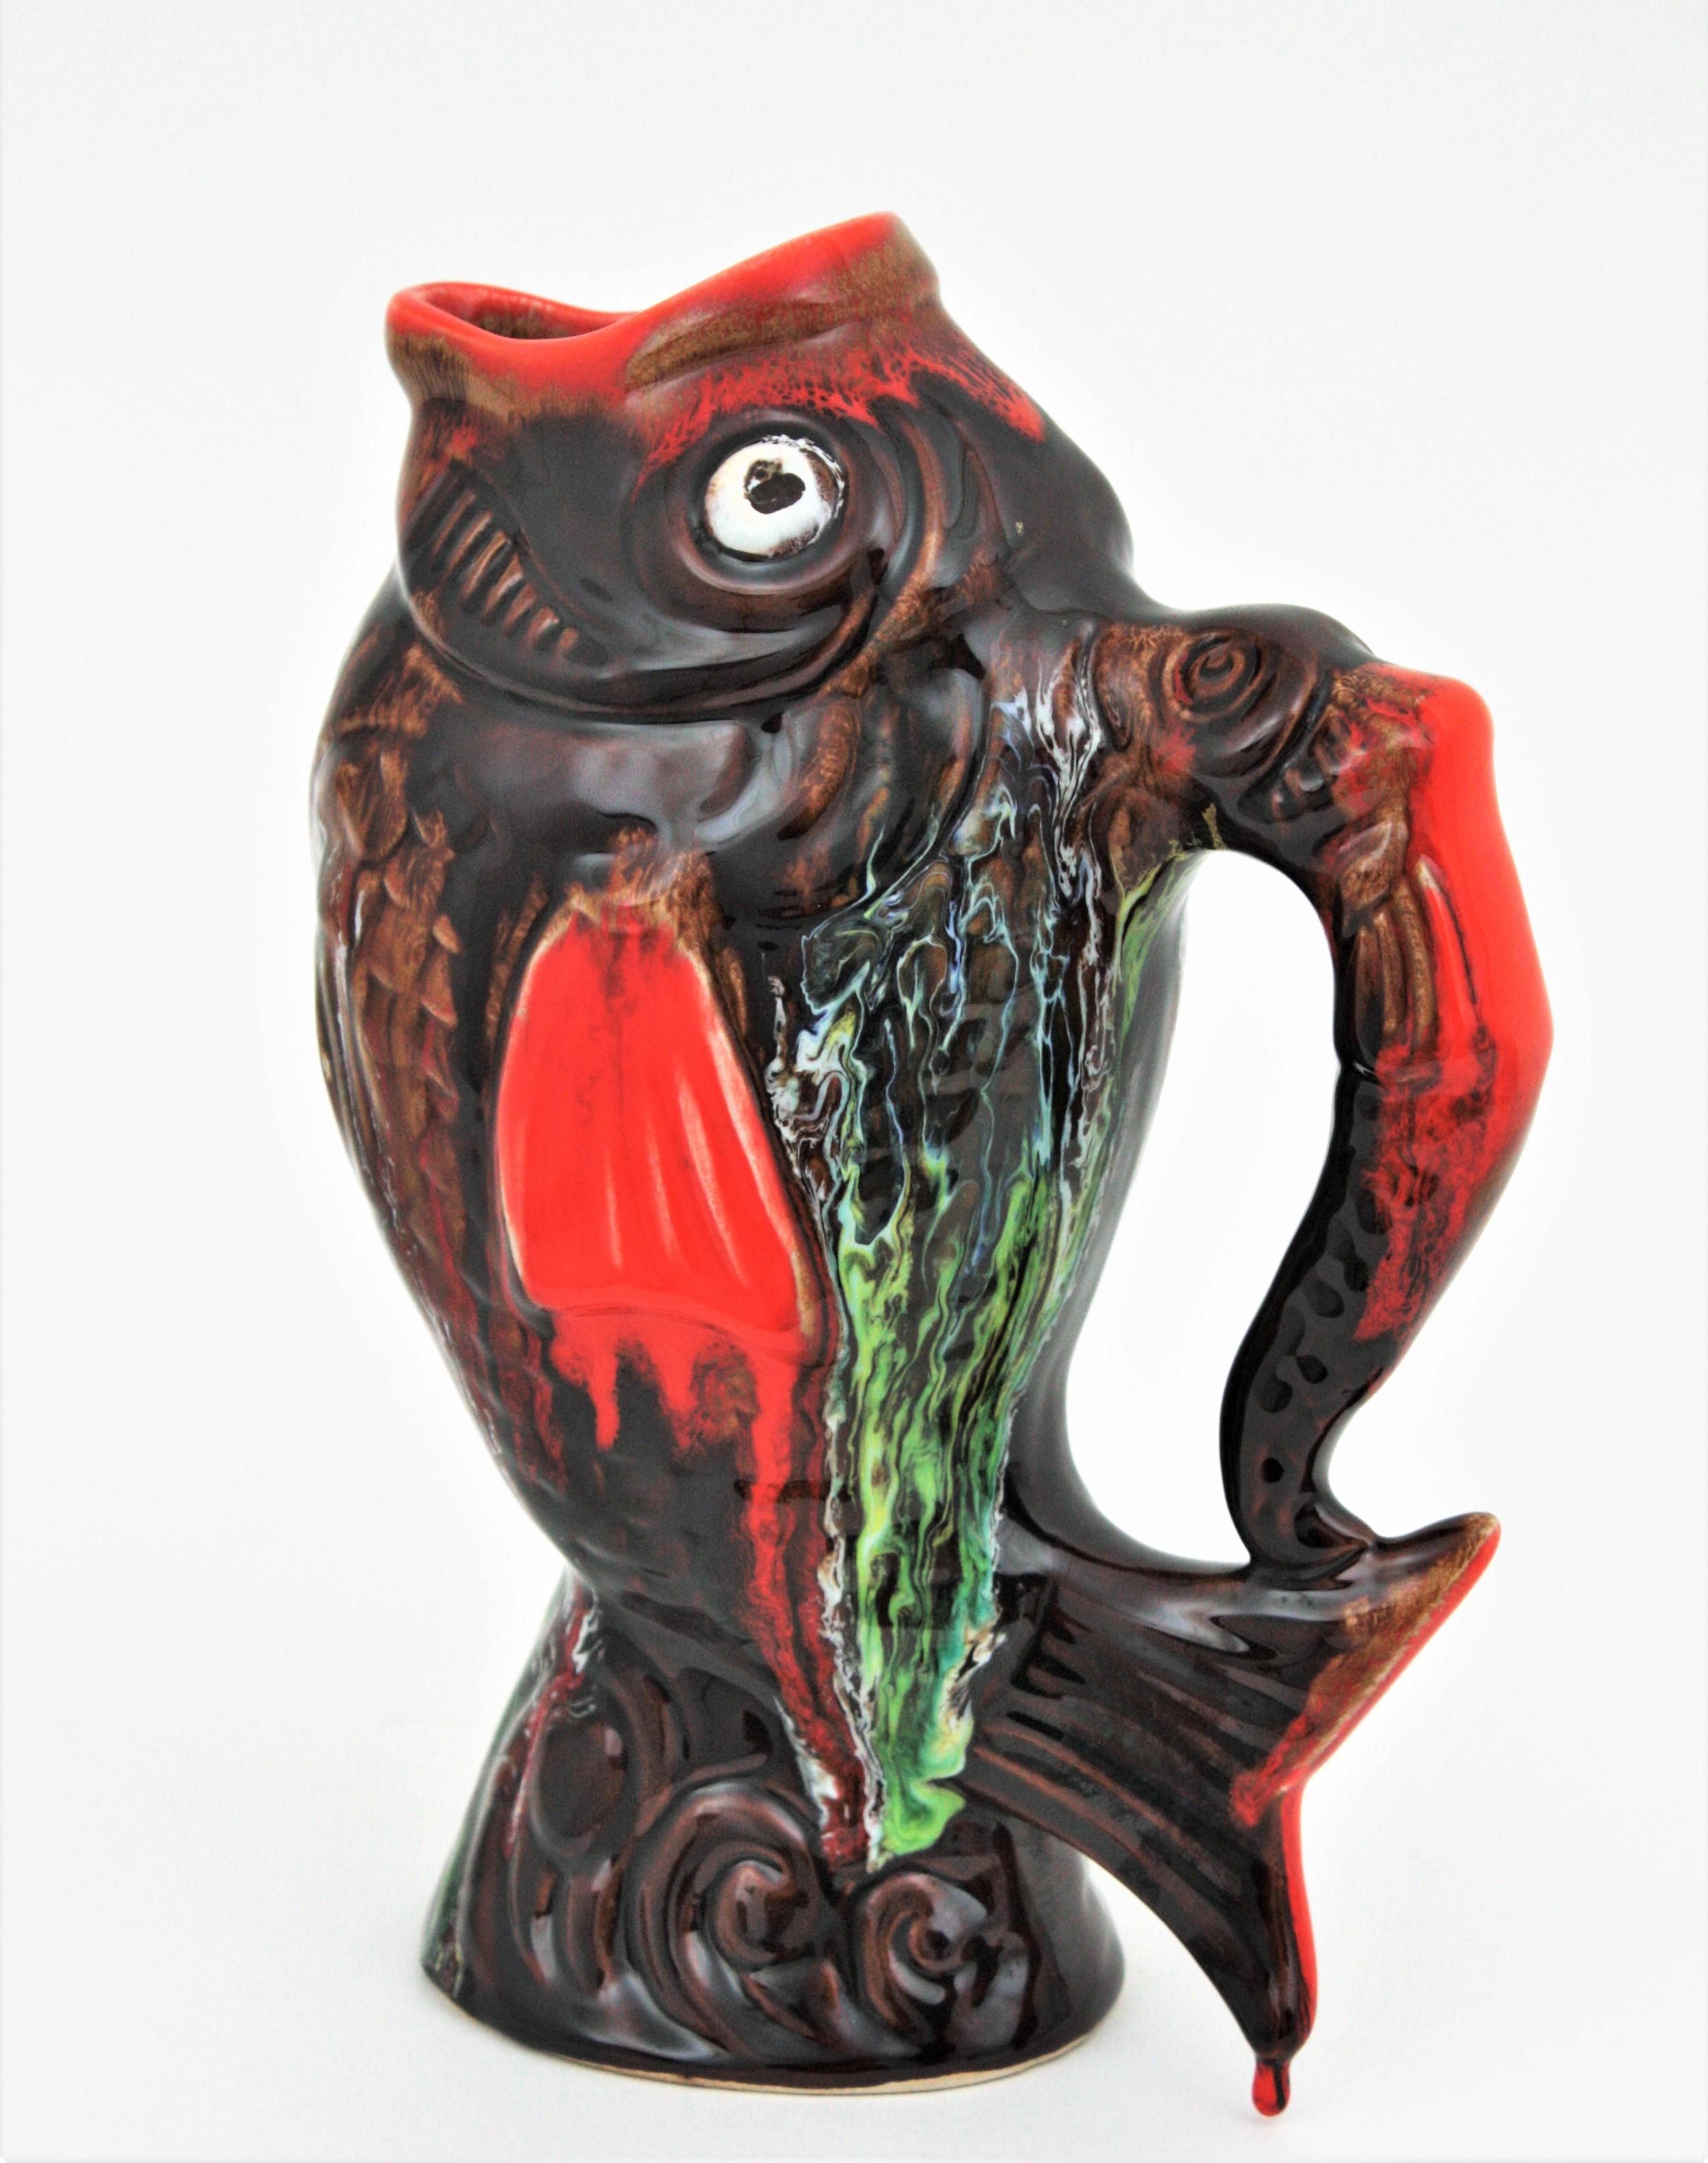 Mid-Century Modern Glazed Ceramic Gurgle Fish Jug Pitcher by Vallauris, 1950s For Sale